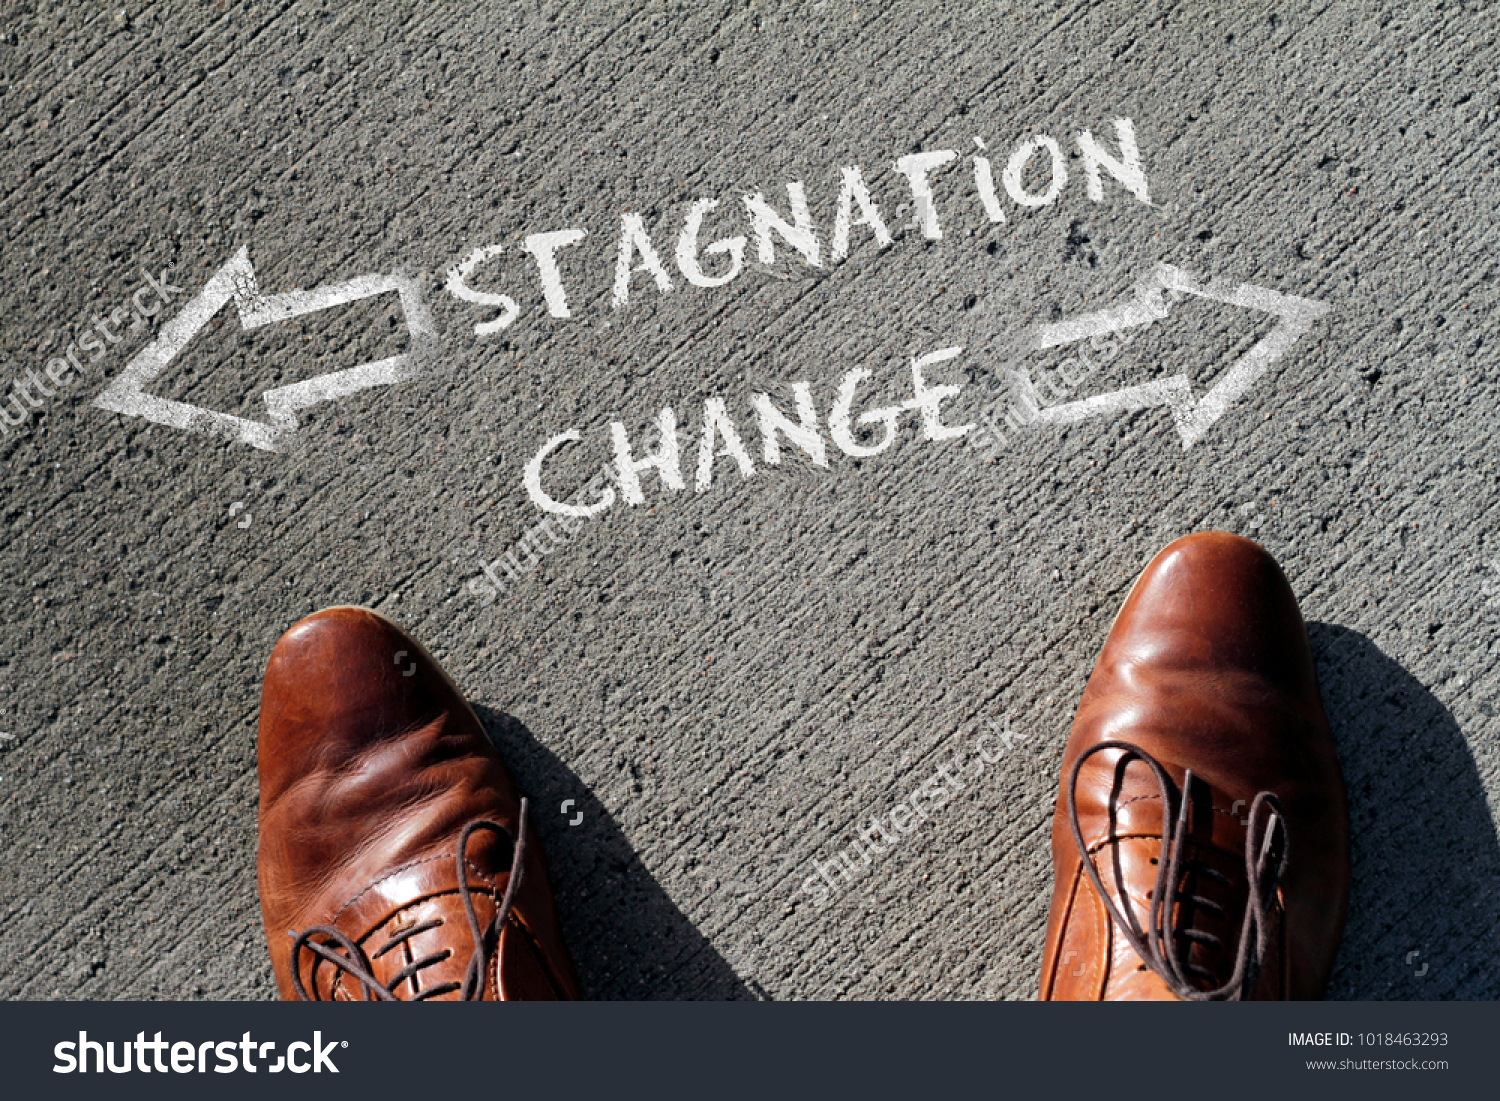 Time to decide: Stagnation or Change